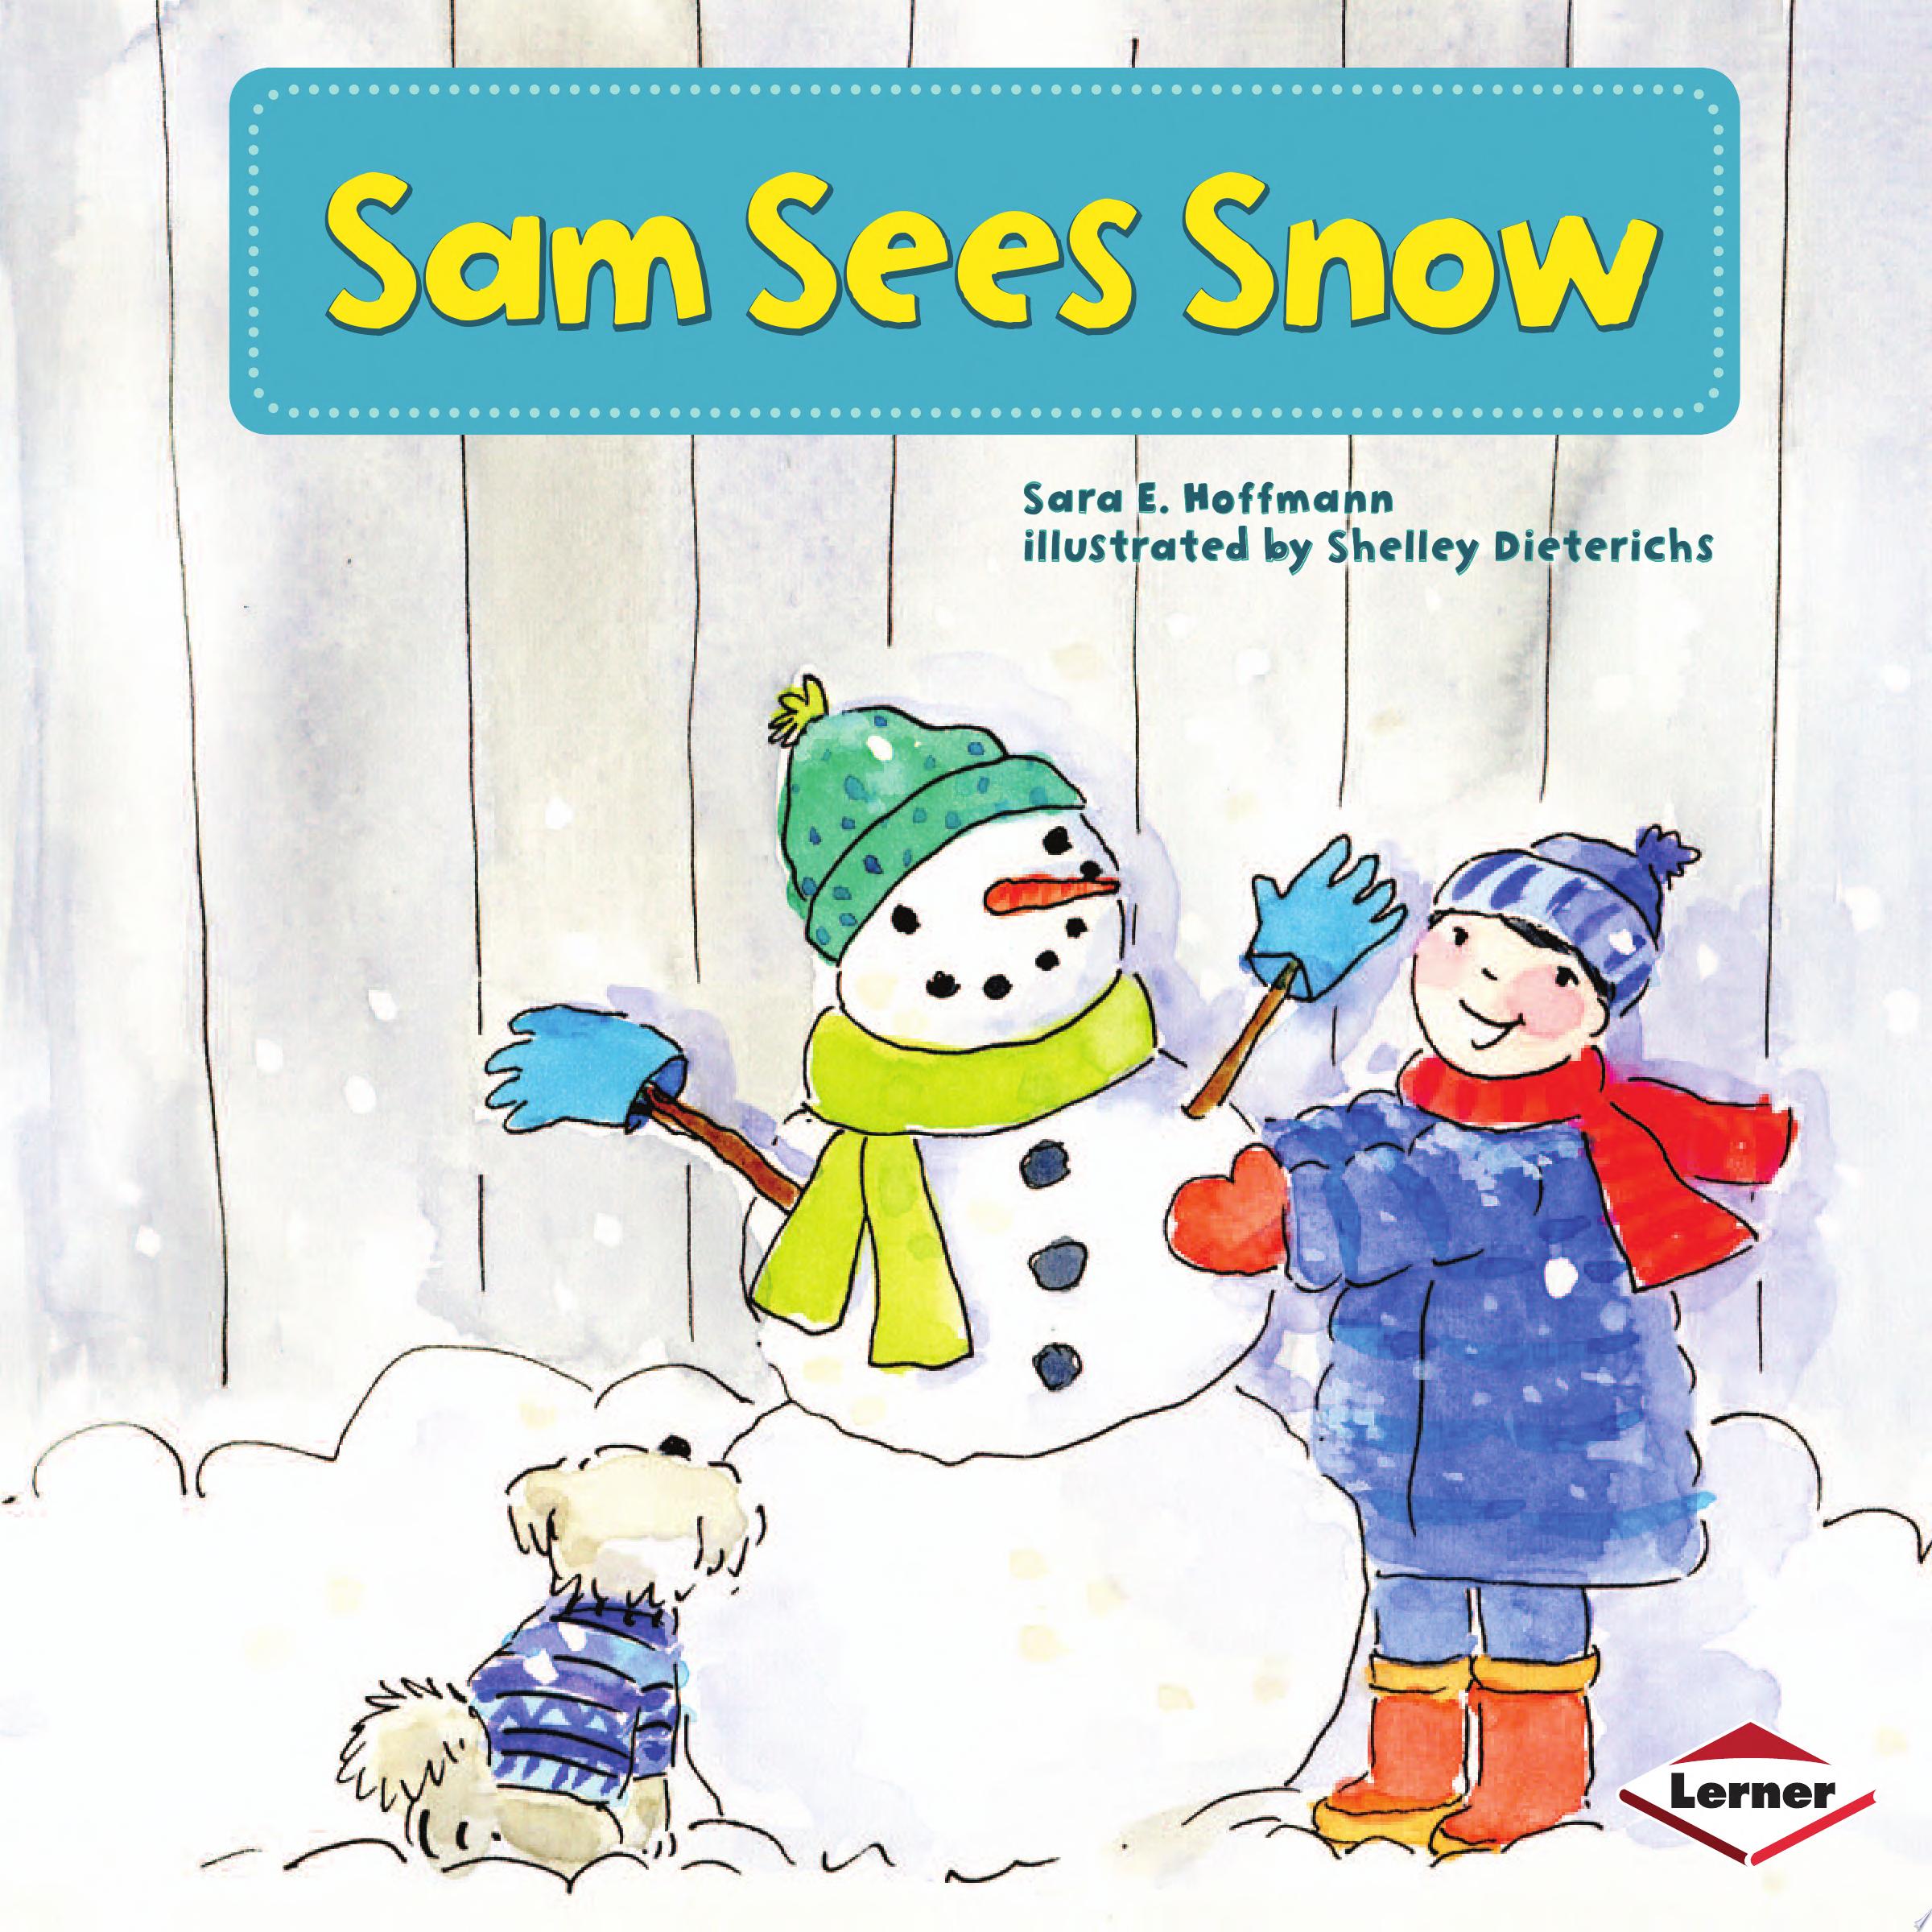 Image for "Sam Sees Snow"